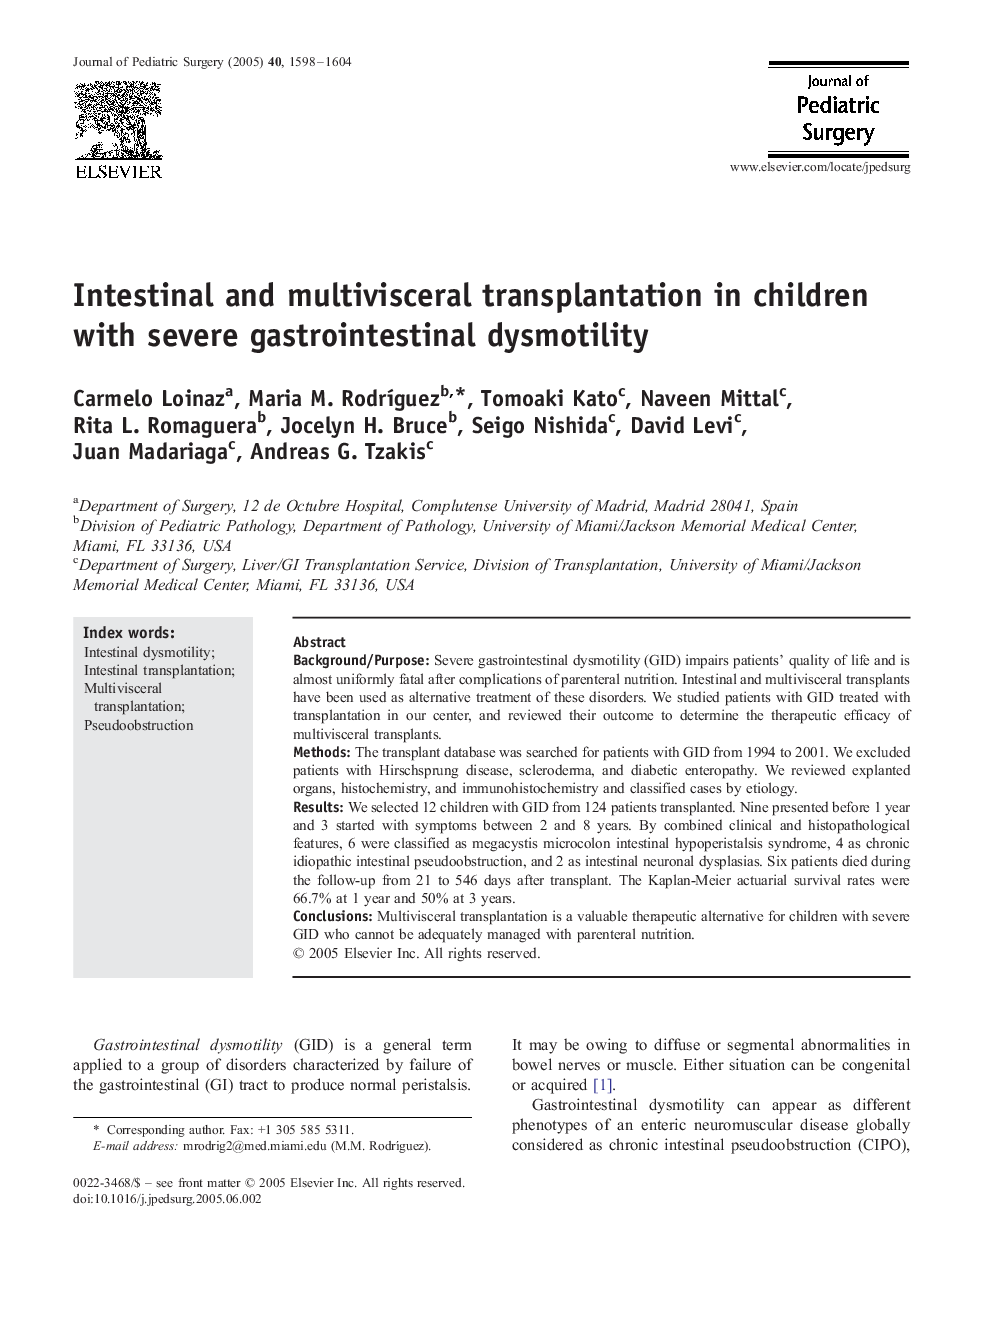 Intestinal and multivisceral transplantation in children with severe gastrointestinal dysmotility